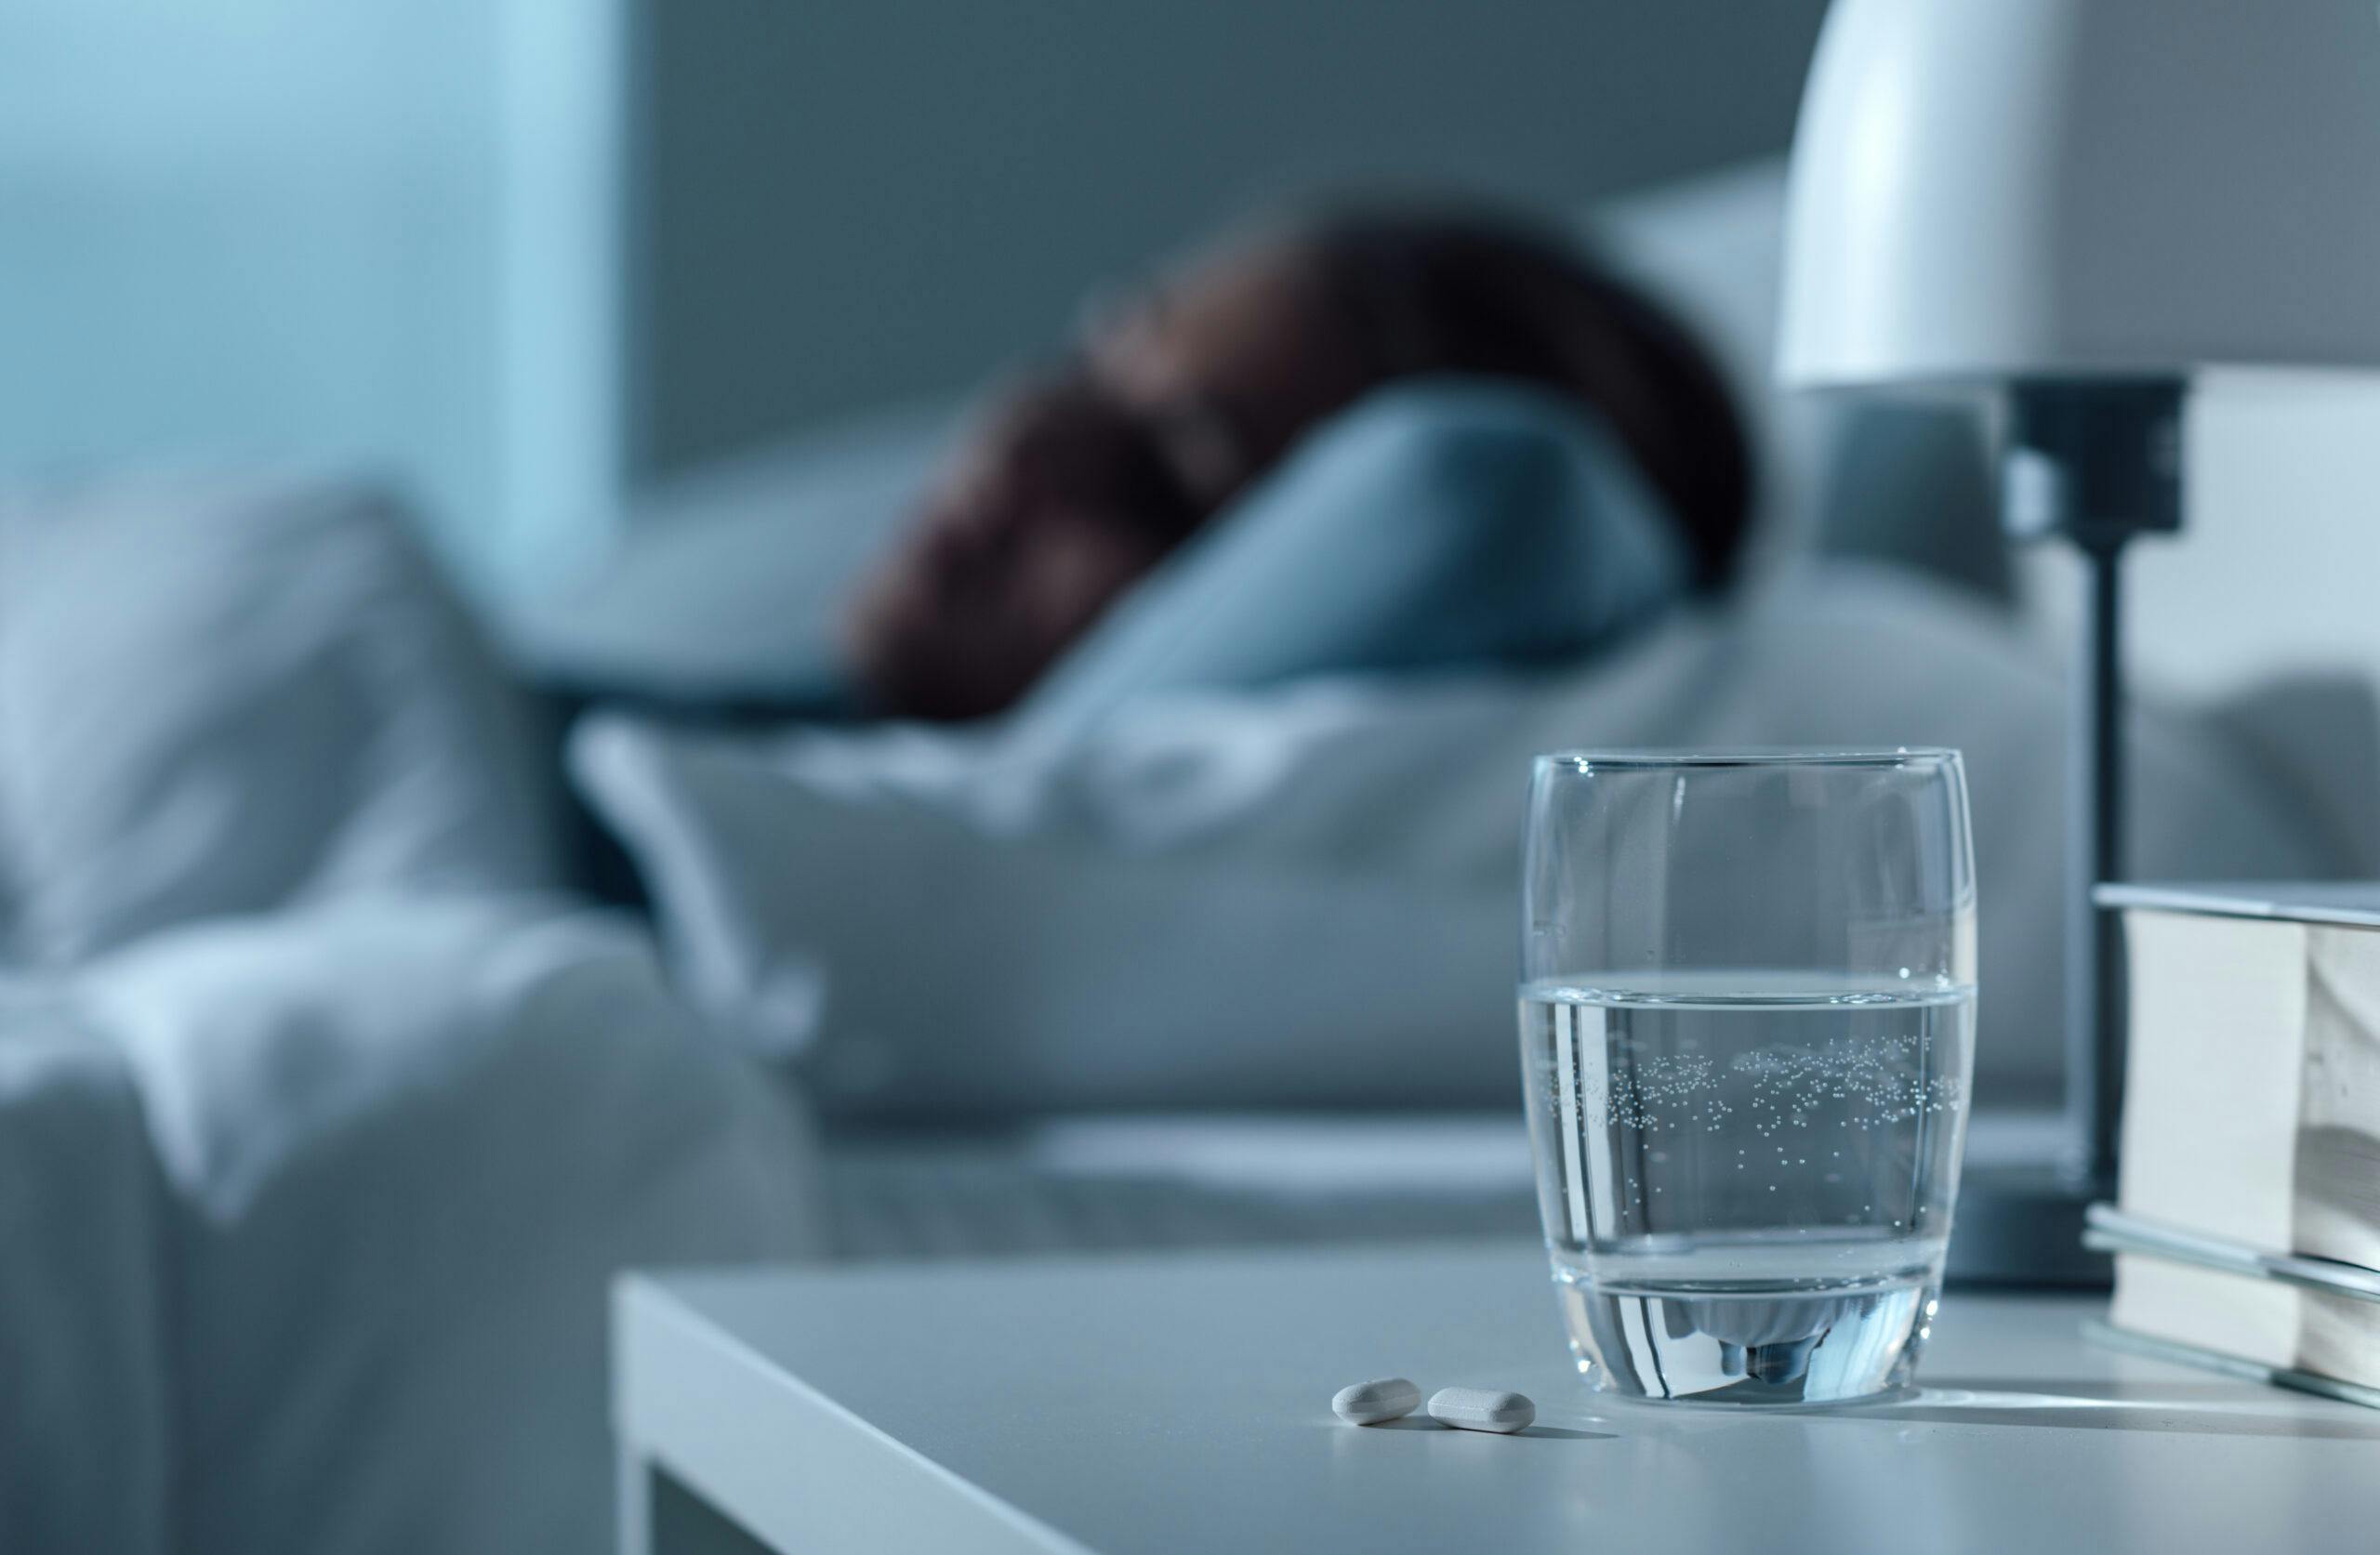 woman sleeping in bed next to water glass and pills klonopin